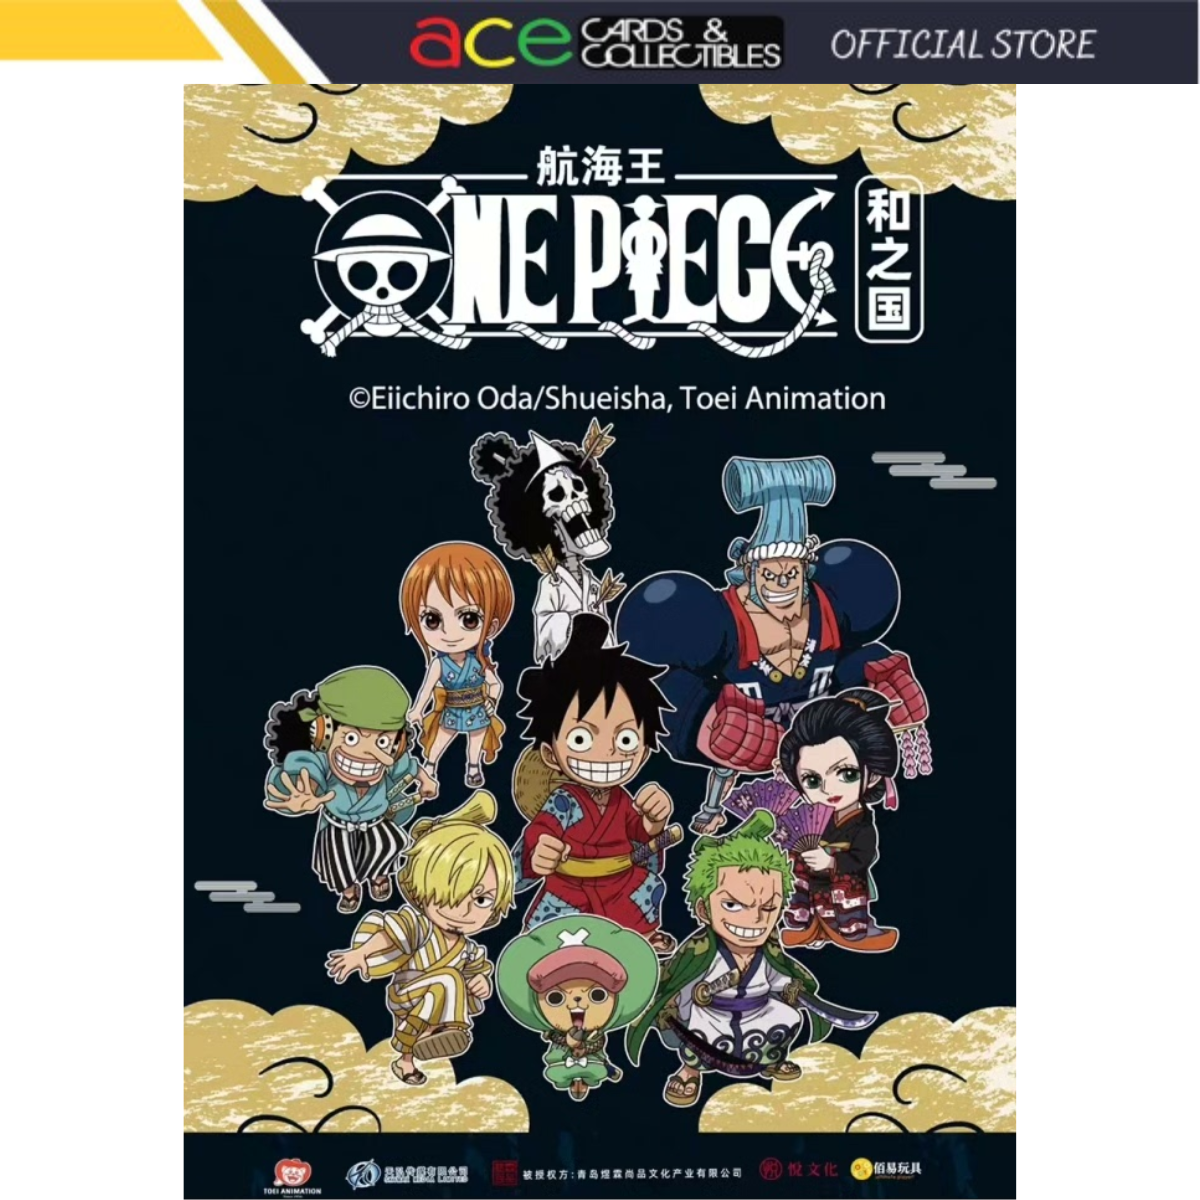 Toei Animation x One Piece Wano Country Metal Keychain-Single Box (Random)-Toei Animation-Ace Cards & Collectibles